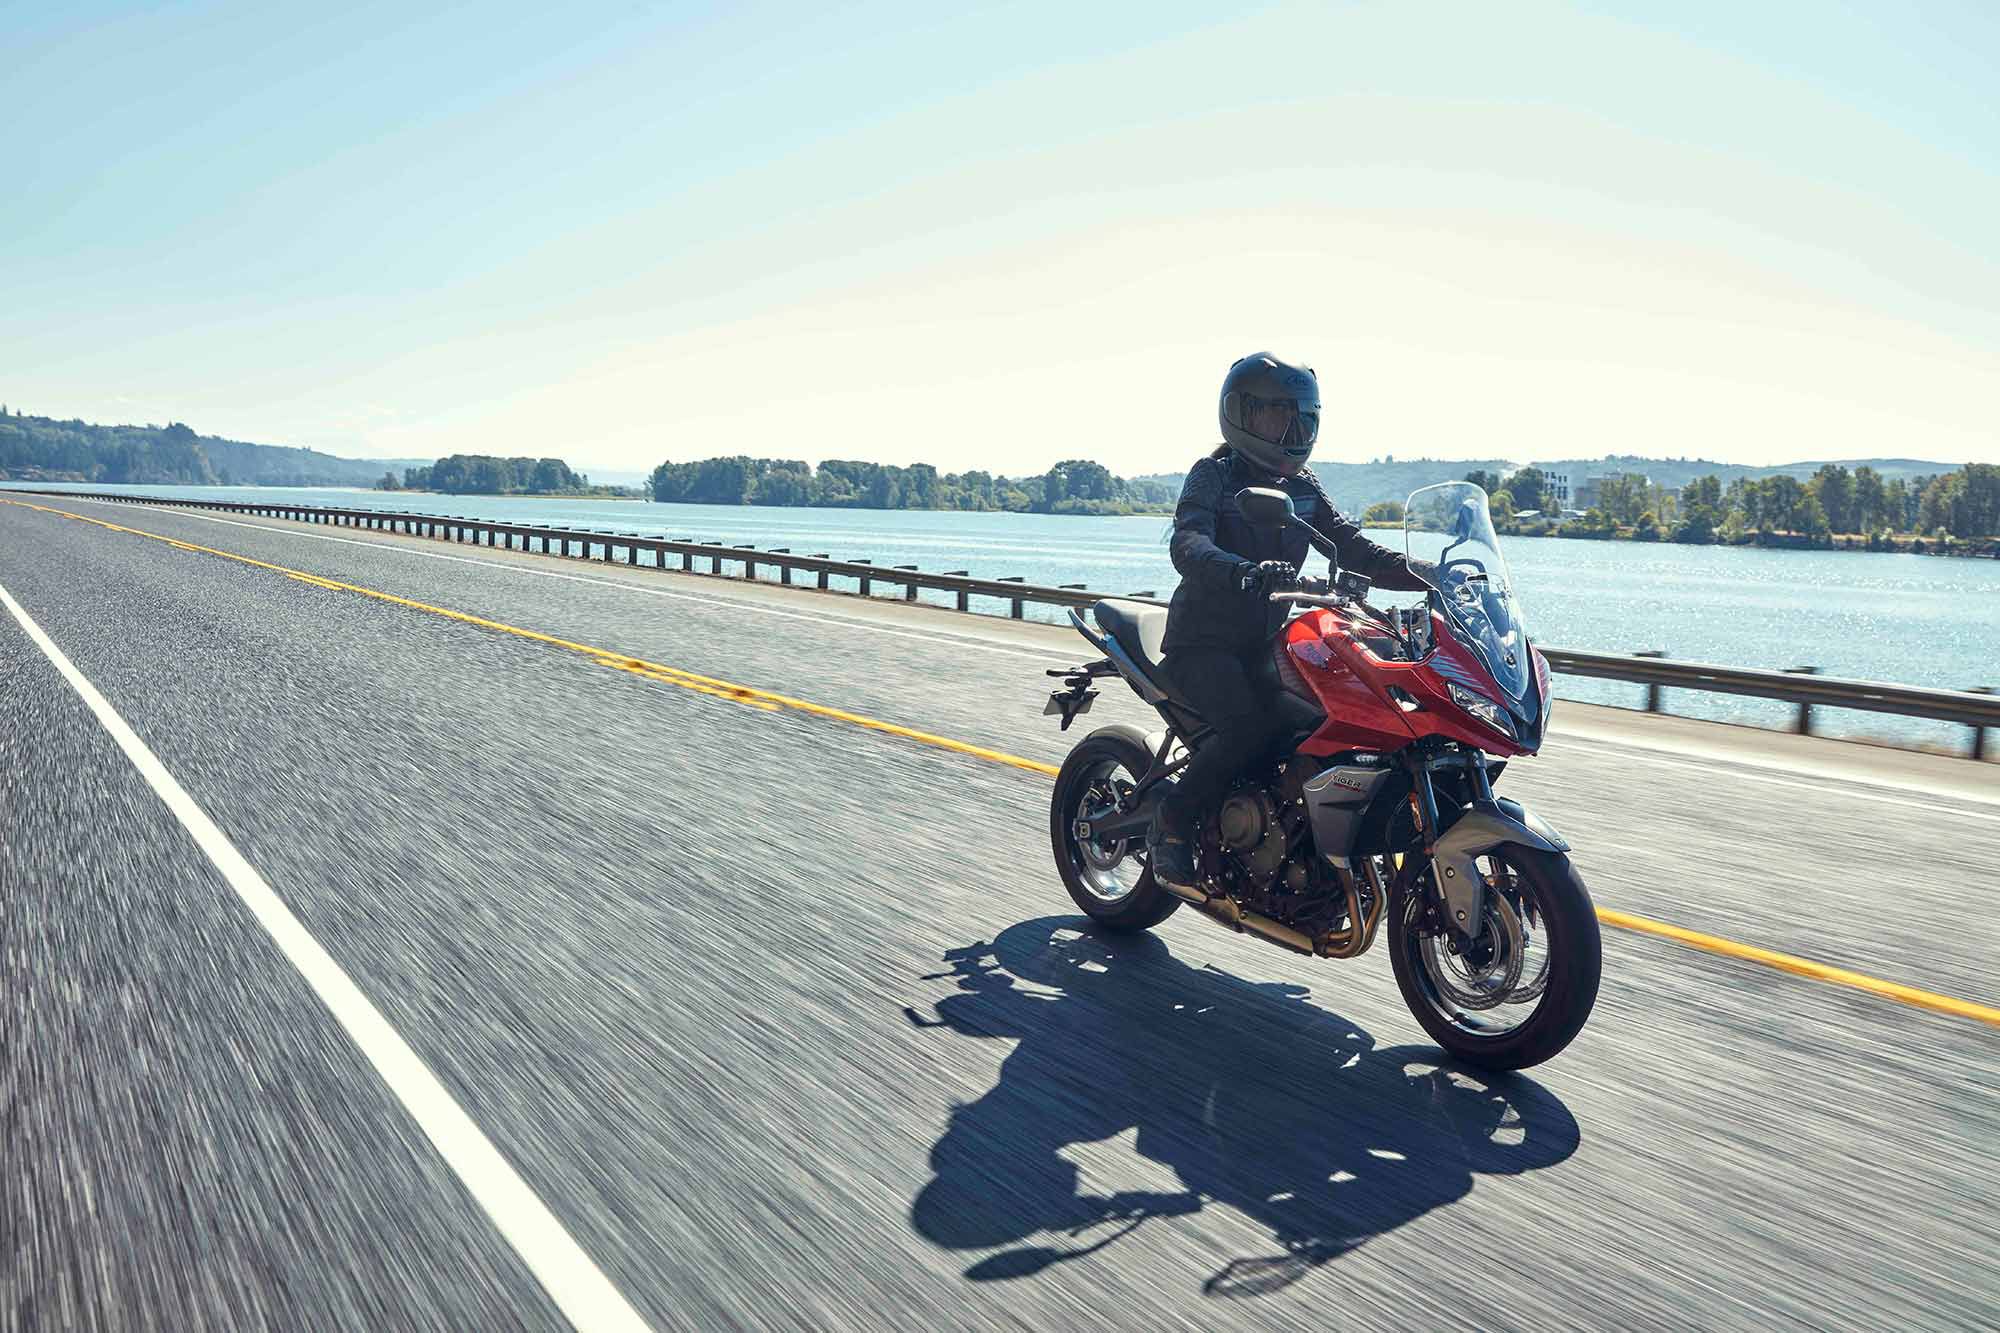 The 2022 Triumph Tiger Sport 660 targets new riders looking for an easy-to-ride motorcycle that embraces the sporty side of the touring equation thanks to its three-cylinder engine, host of rider safety features, and its burly good looks.